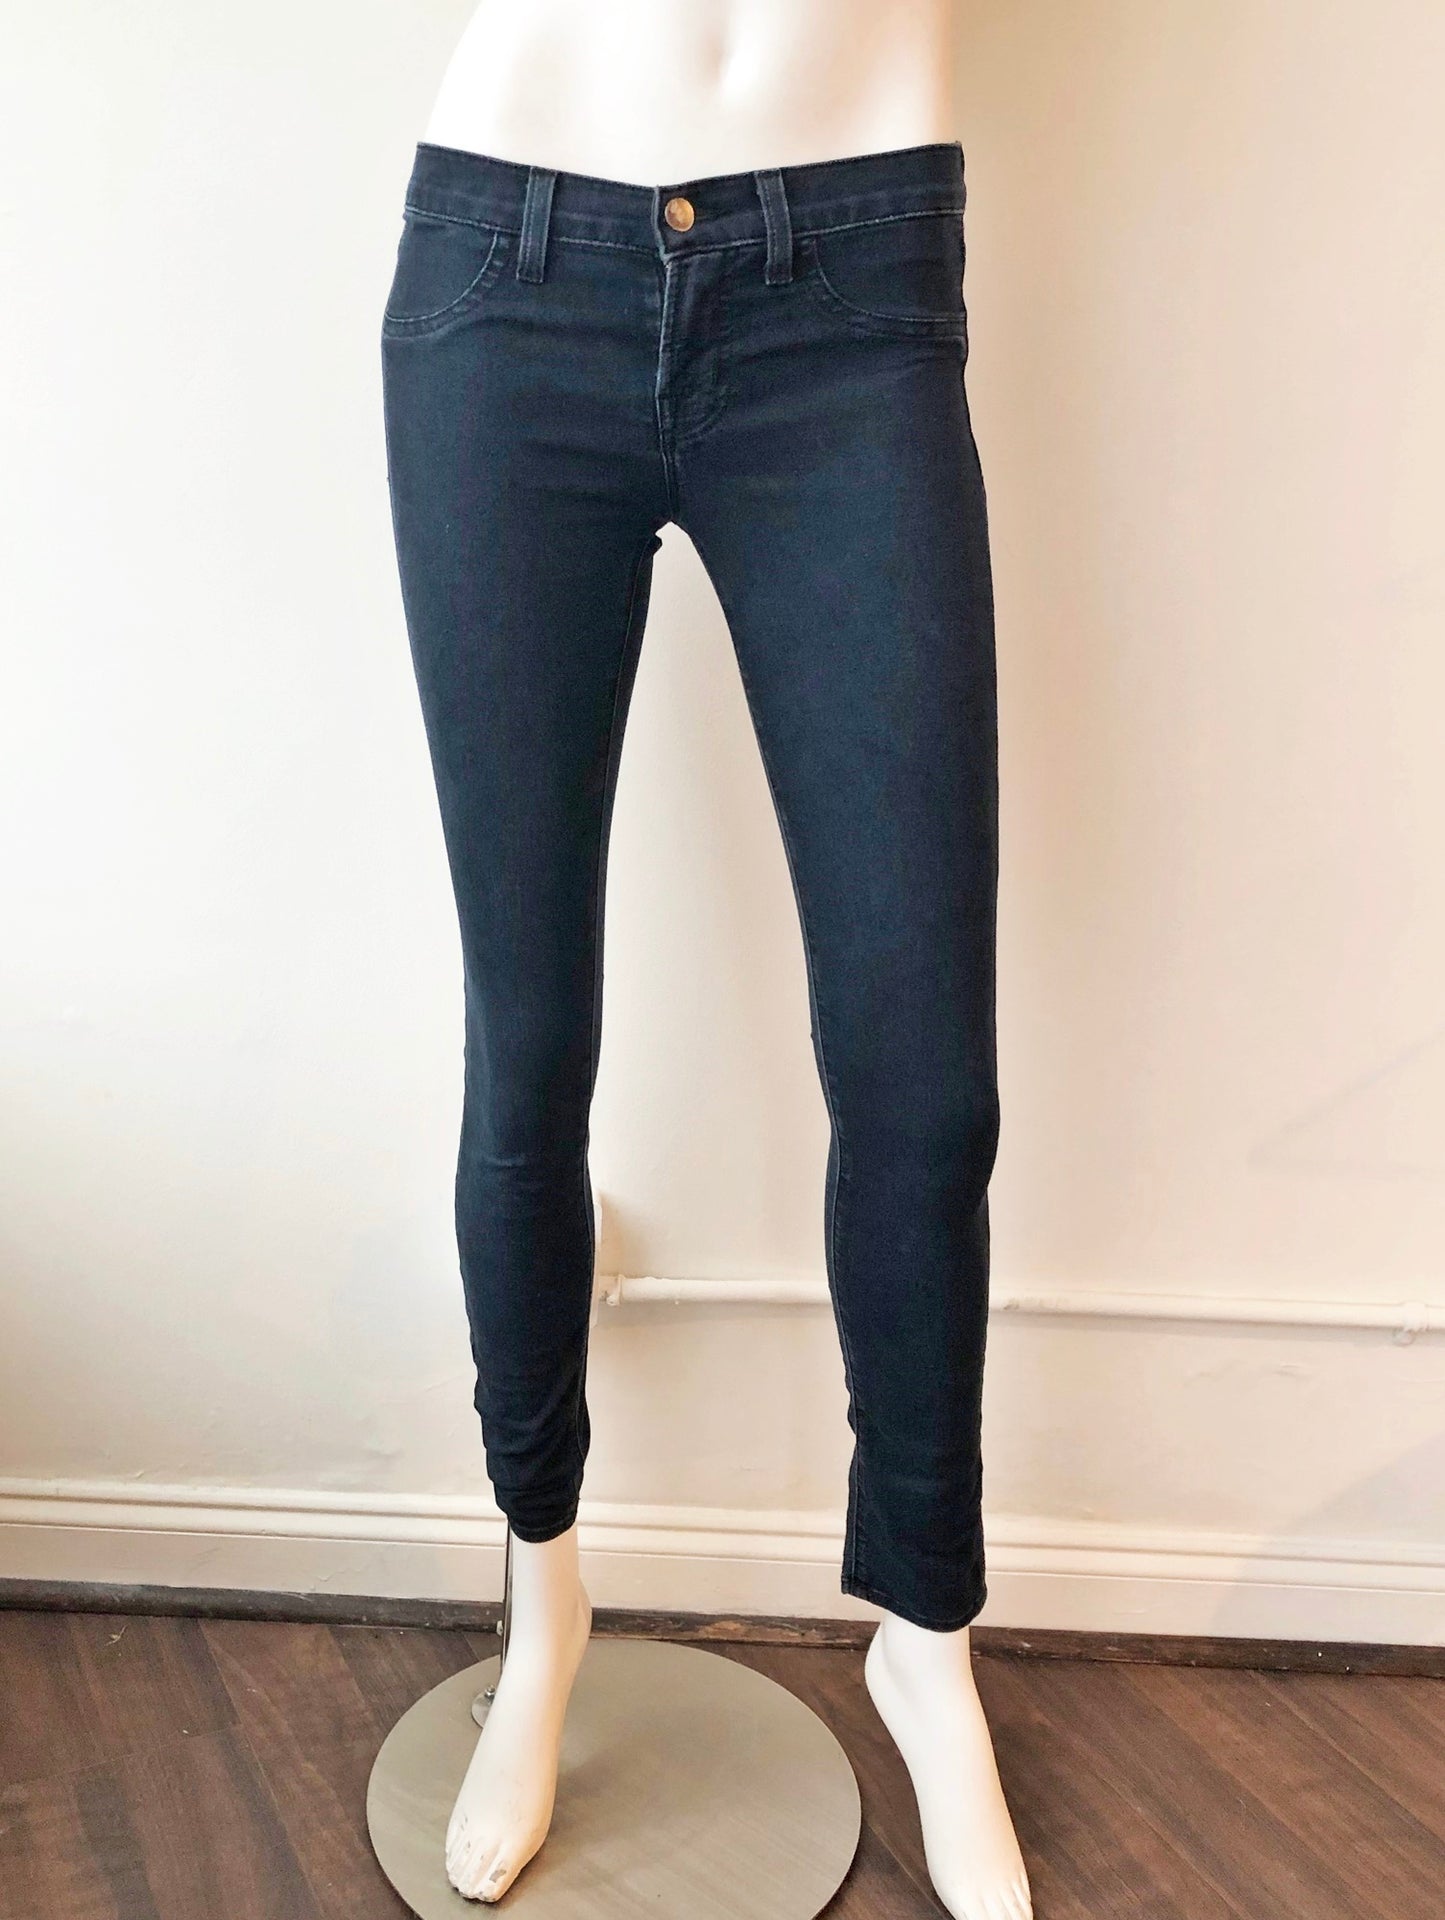 Olympia Low Rise Skinny Jeans Size 26